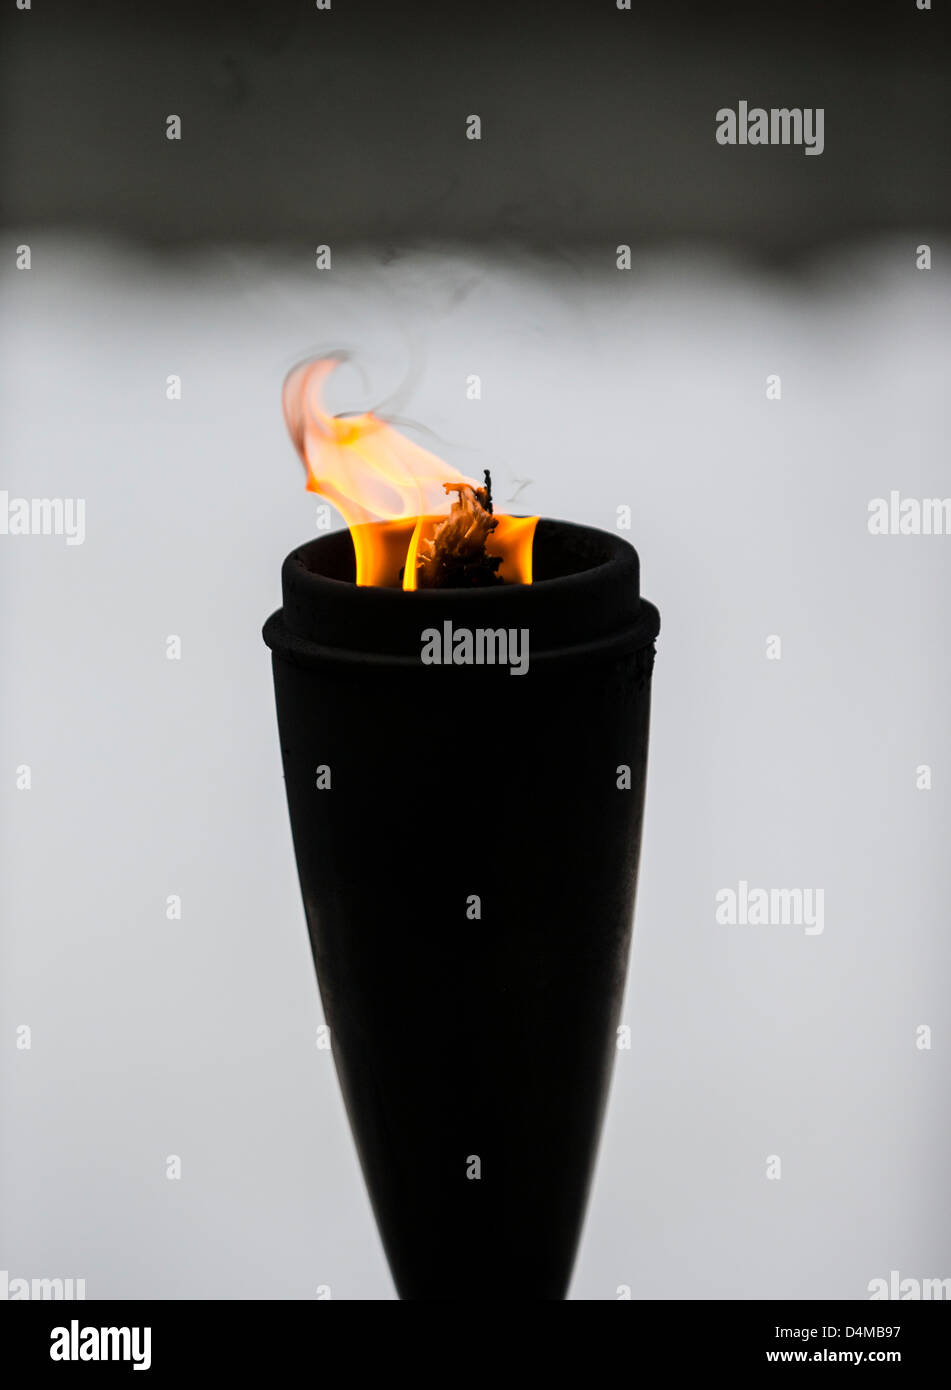 A wicked, oil-burning flaming torch or brand Stock Photo